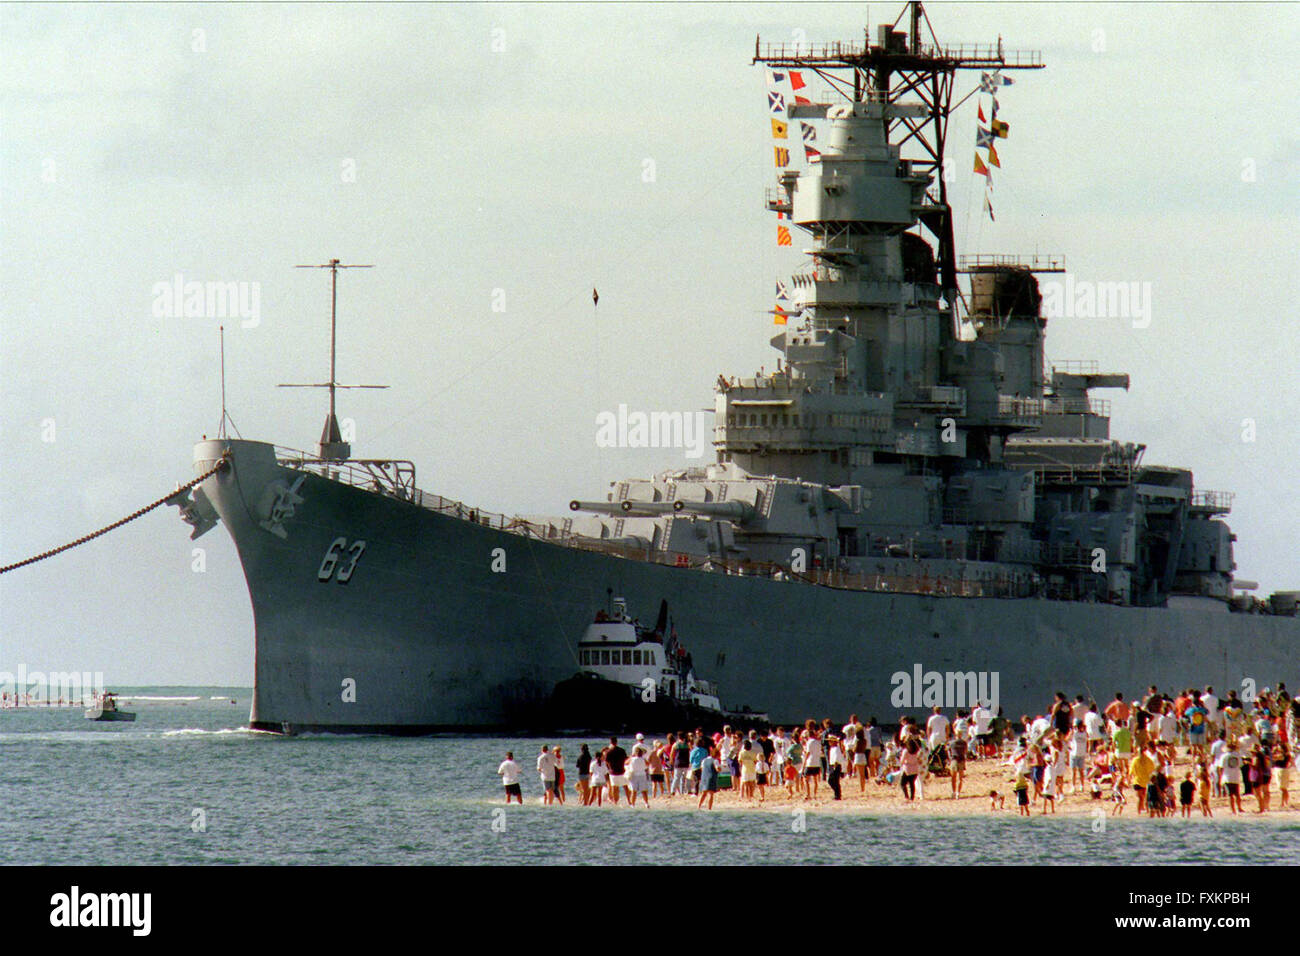 Pearl Harbor, Hawaii, USA. 22nd June, 1998. People gather on the beach to see the battleship USS Missouri (BB 63) enter the channel into Pearl Harbor, Hawaii, on June 22, 1998. United States Secretary of the Navy John H. Dalton signed the Donation Agreement on May 4th, allowing Missouri to be used as a museum near the Arizona Memorial. The ship was towed from Bremerton, Washington. Mandatory Credit: David Weideman/U.S. Navy via CNP © David Weideman/CNP/ZUMA Wire/Alamy Live News Stock Photo